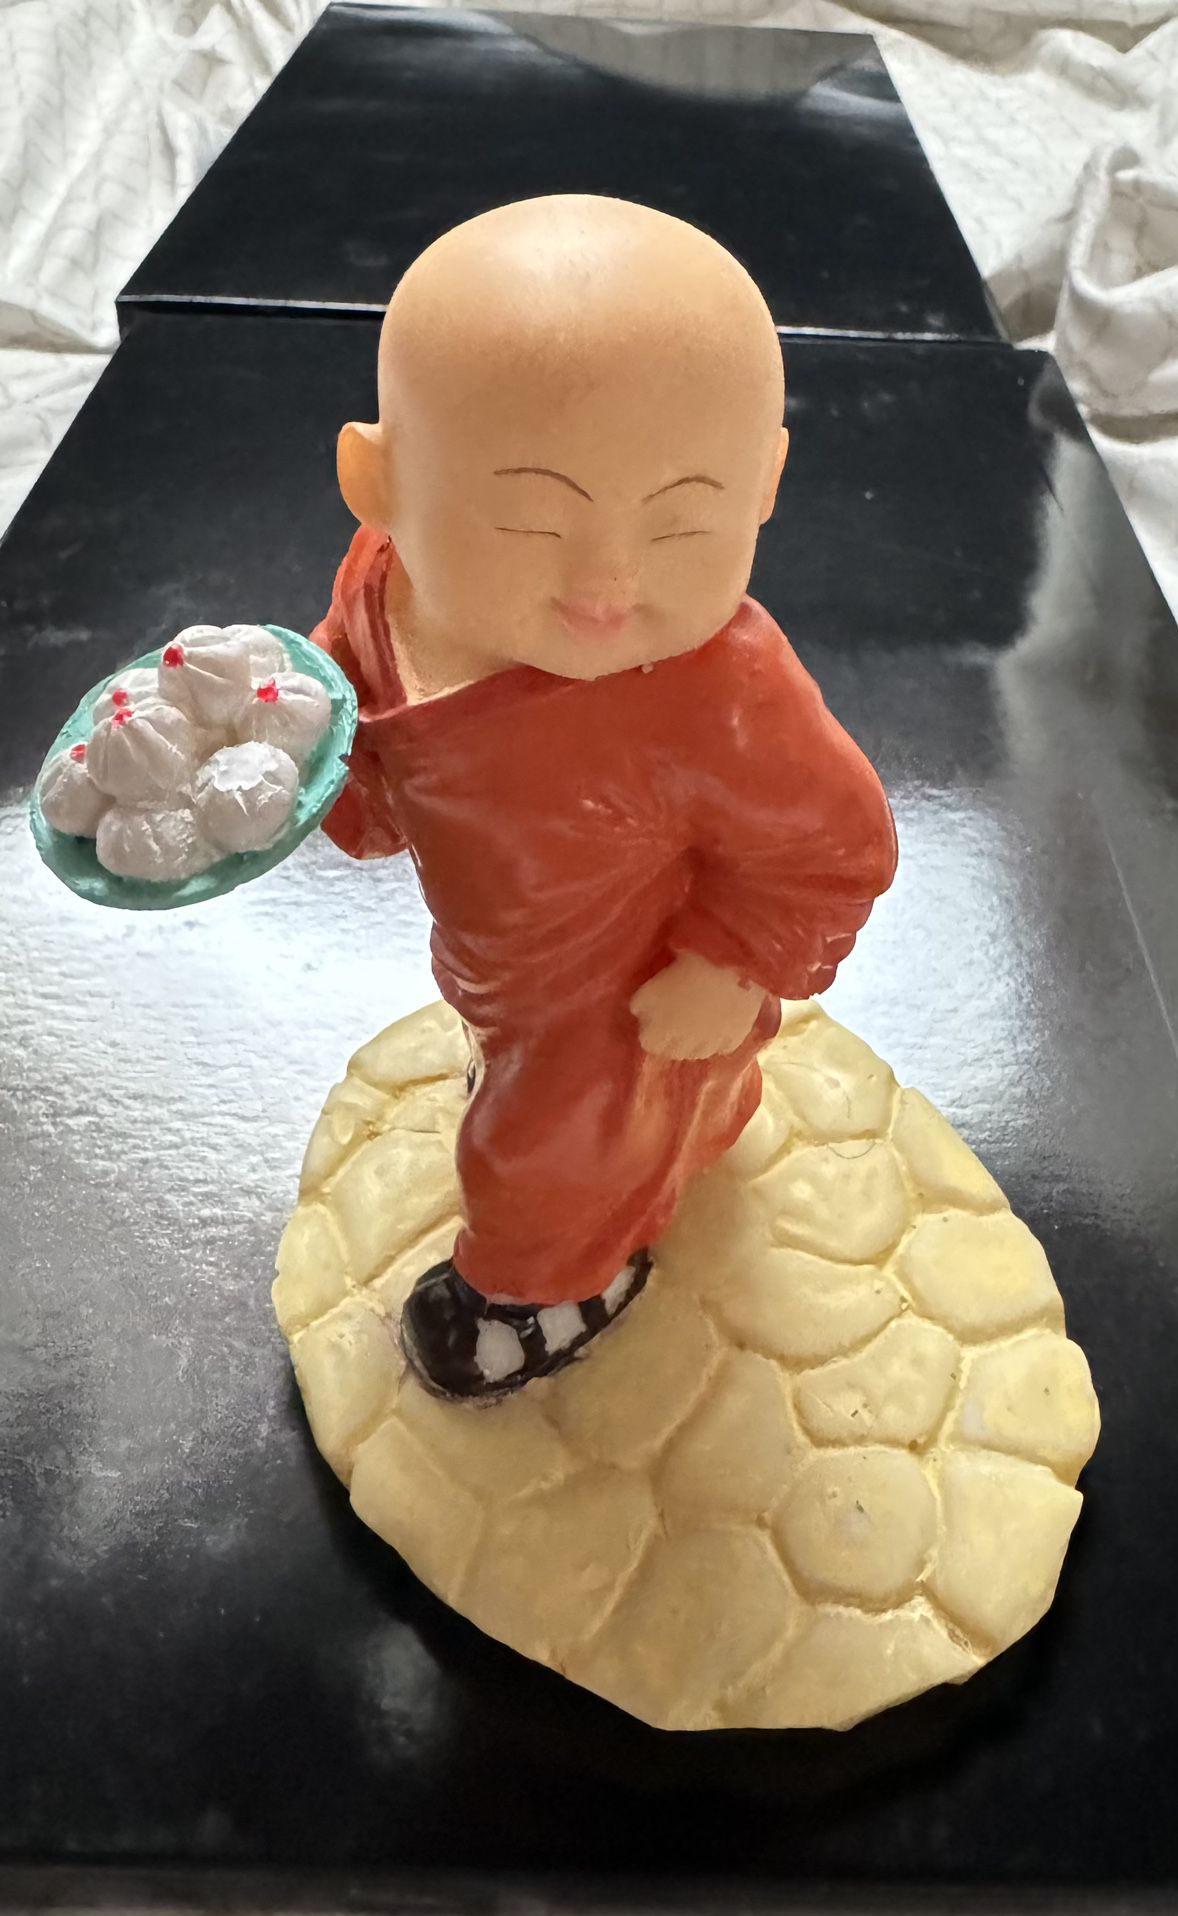 Brand New Buddha Monk Baby Statue Figurine Serving Food 4” - 6 “inches $6 Each !!!ACCEPTING OFFERS!!!